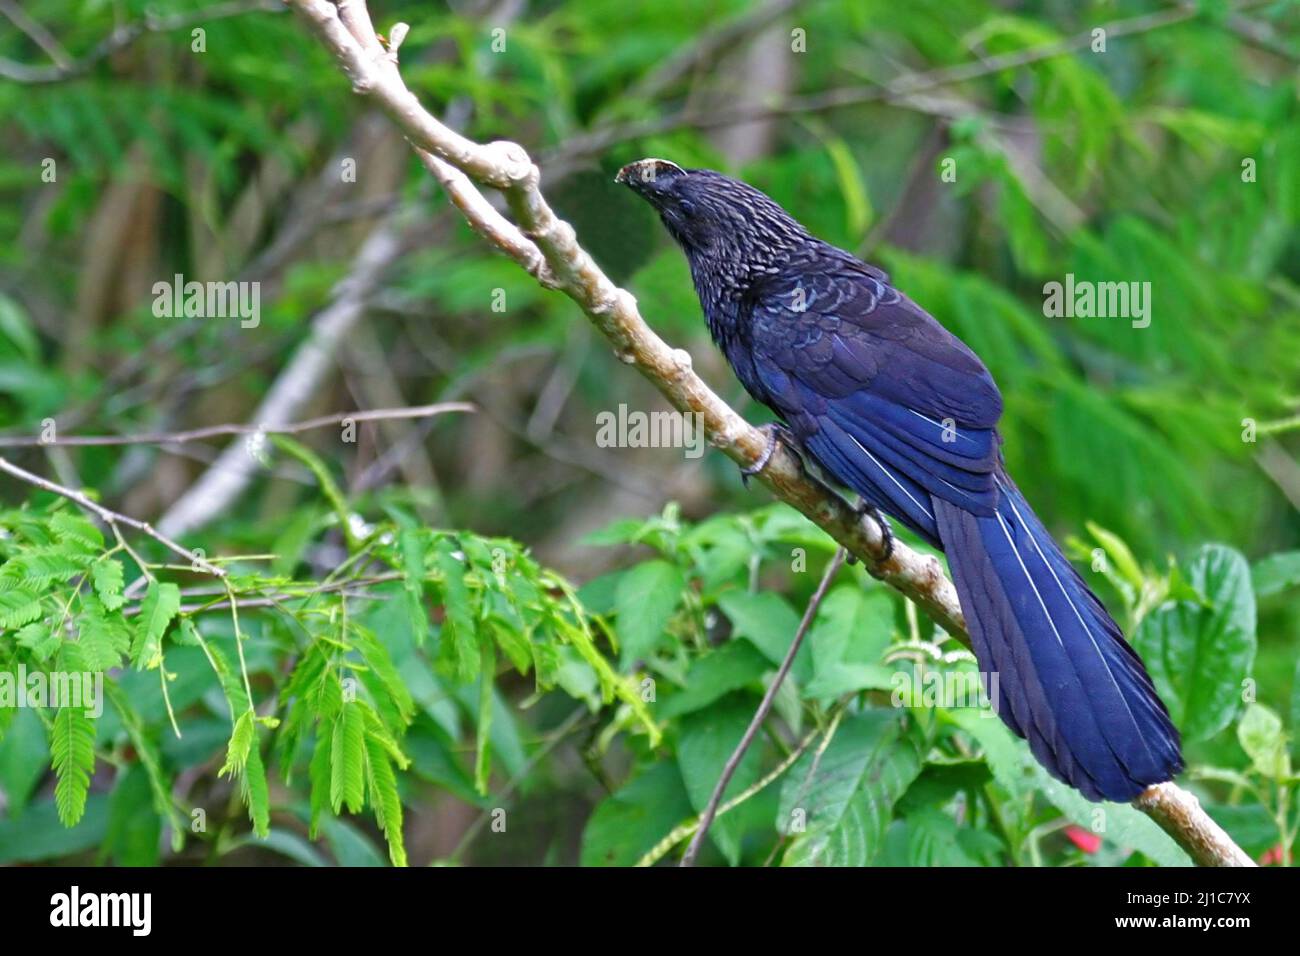 A Smooth-billed Ani, Crotophaga ani, perched on a small branch Stock Photo